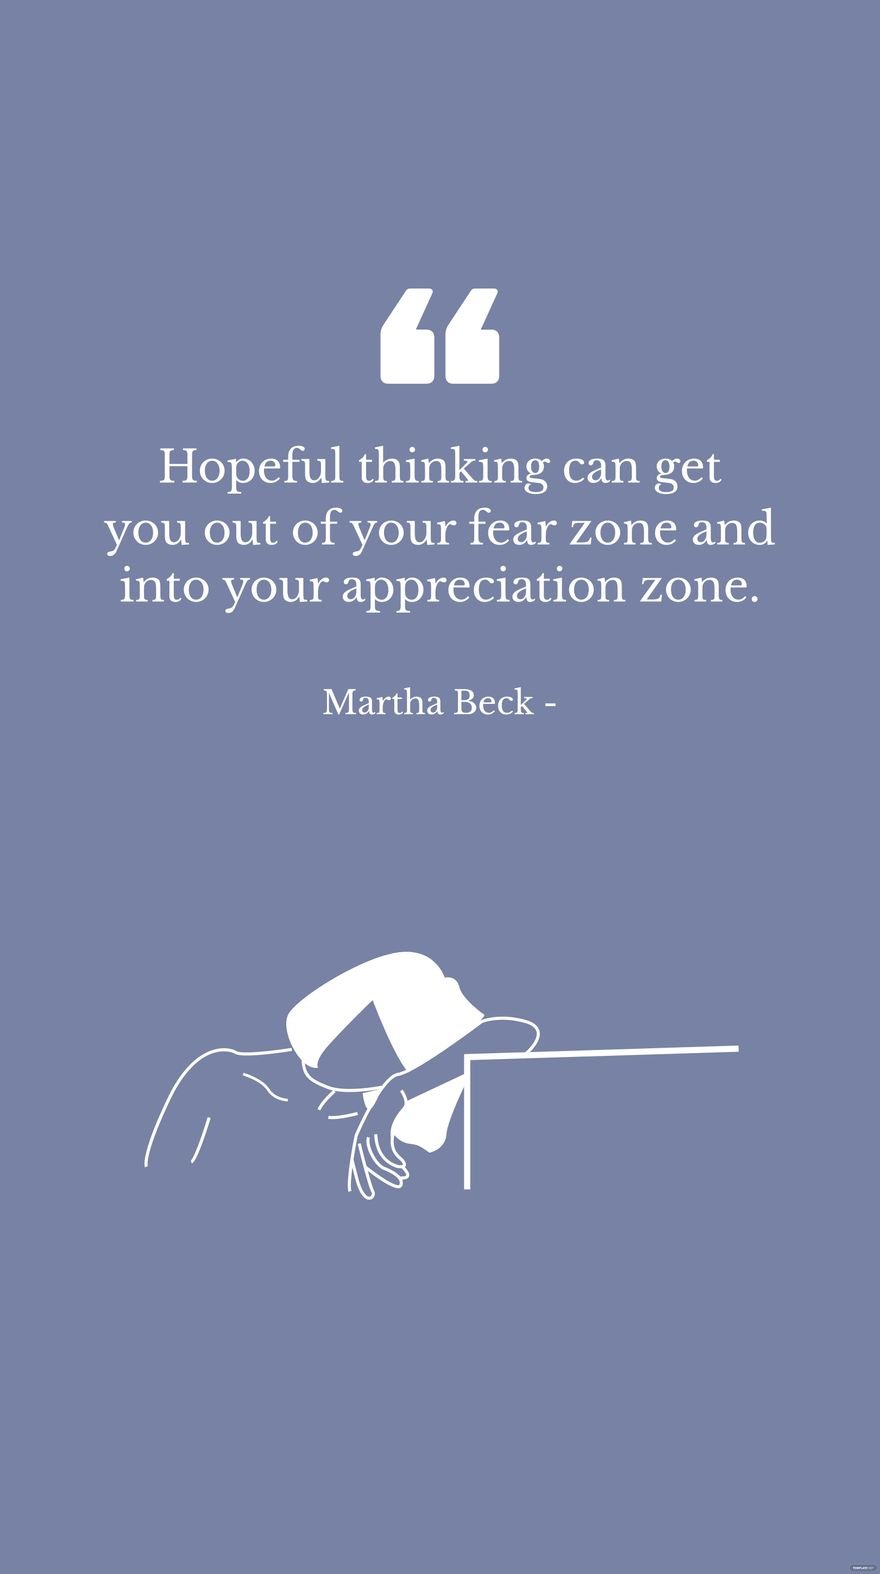 Martha Beck - Hopeful thinking can get you out of your fear zone and into your appreciation zone.